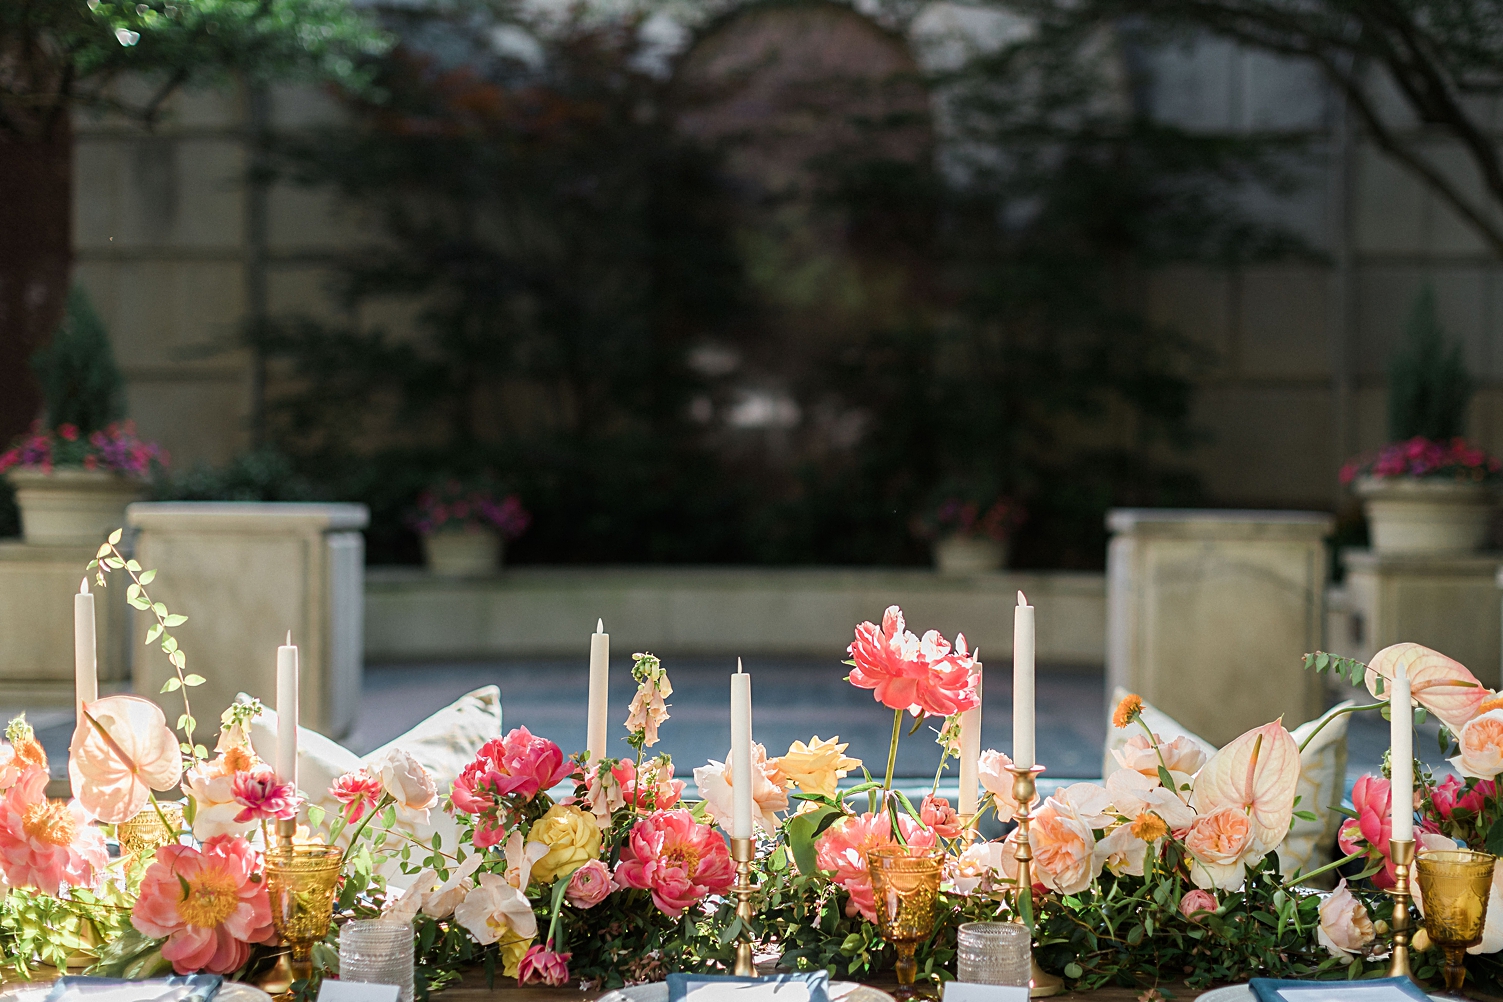 Outdoor garden wedding reception table with pink flowers and candles